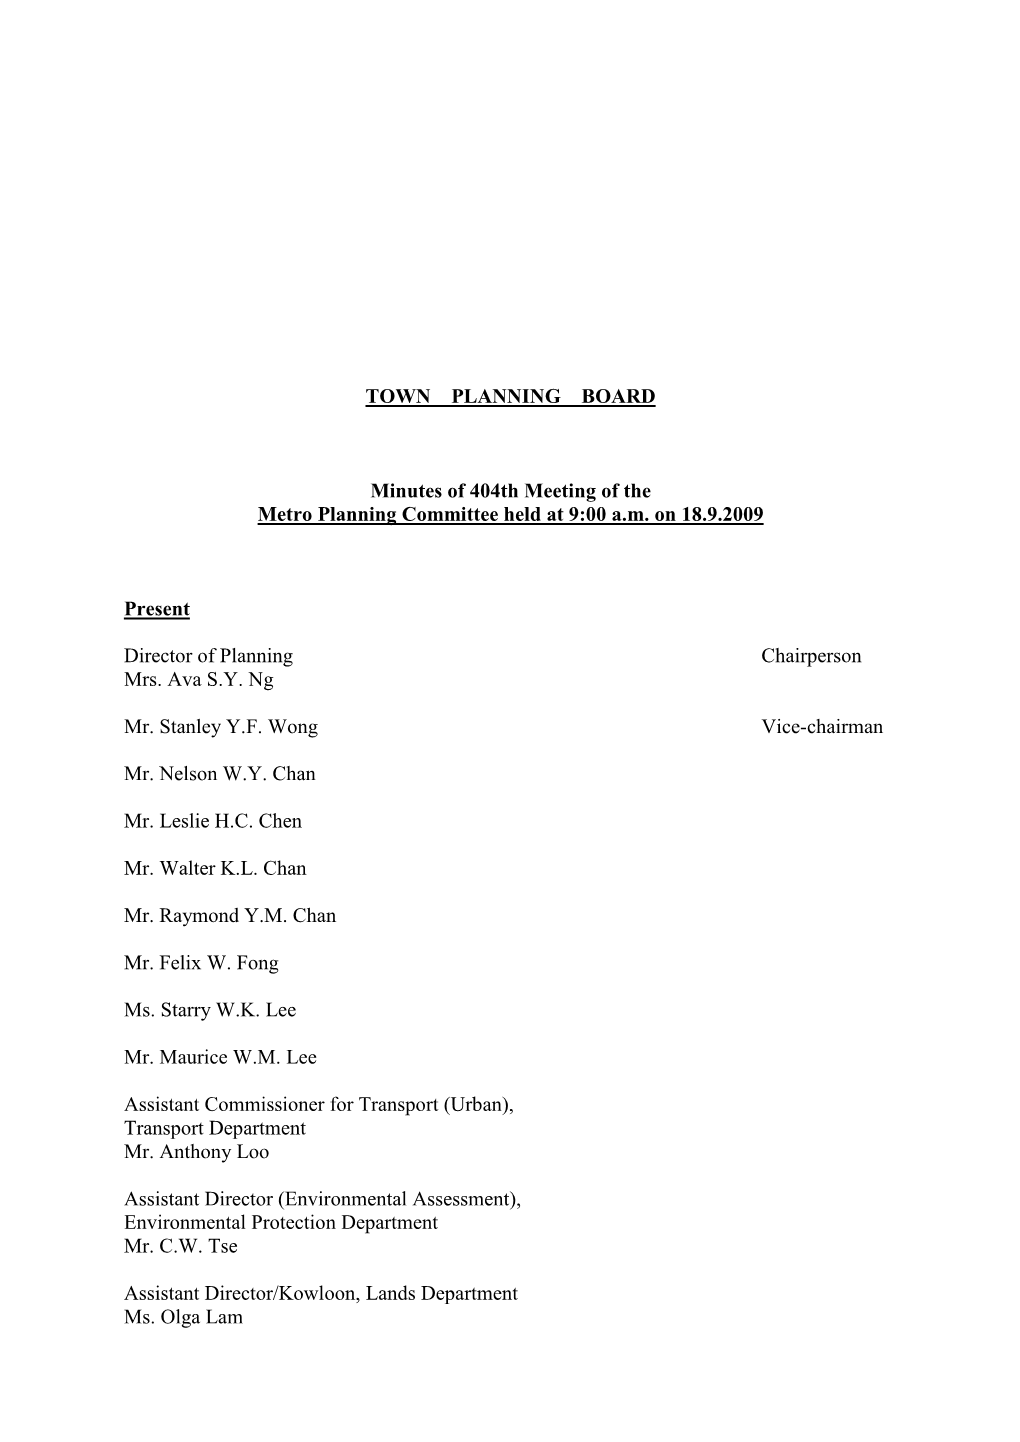 TOWN PLANNING BOARD Minutes of 404Th Meeting of the Metro